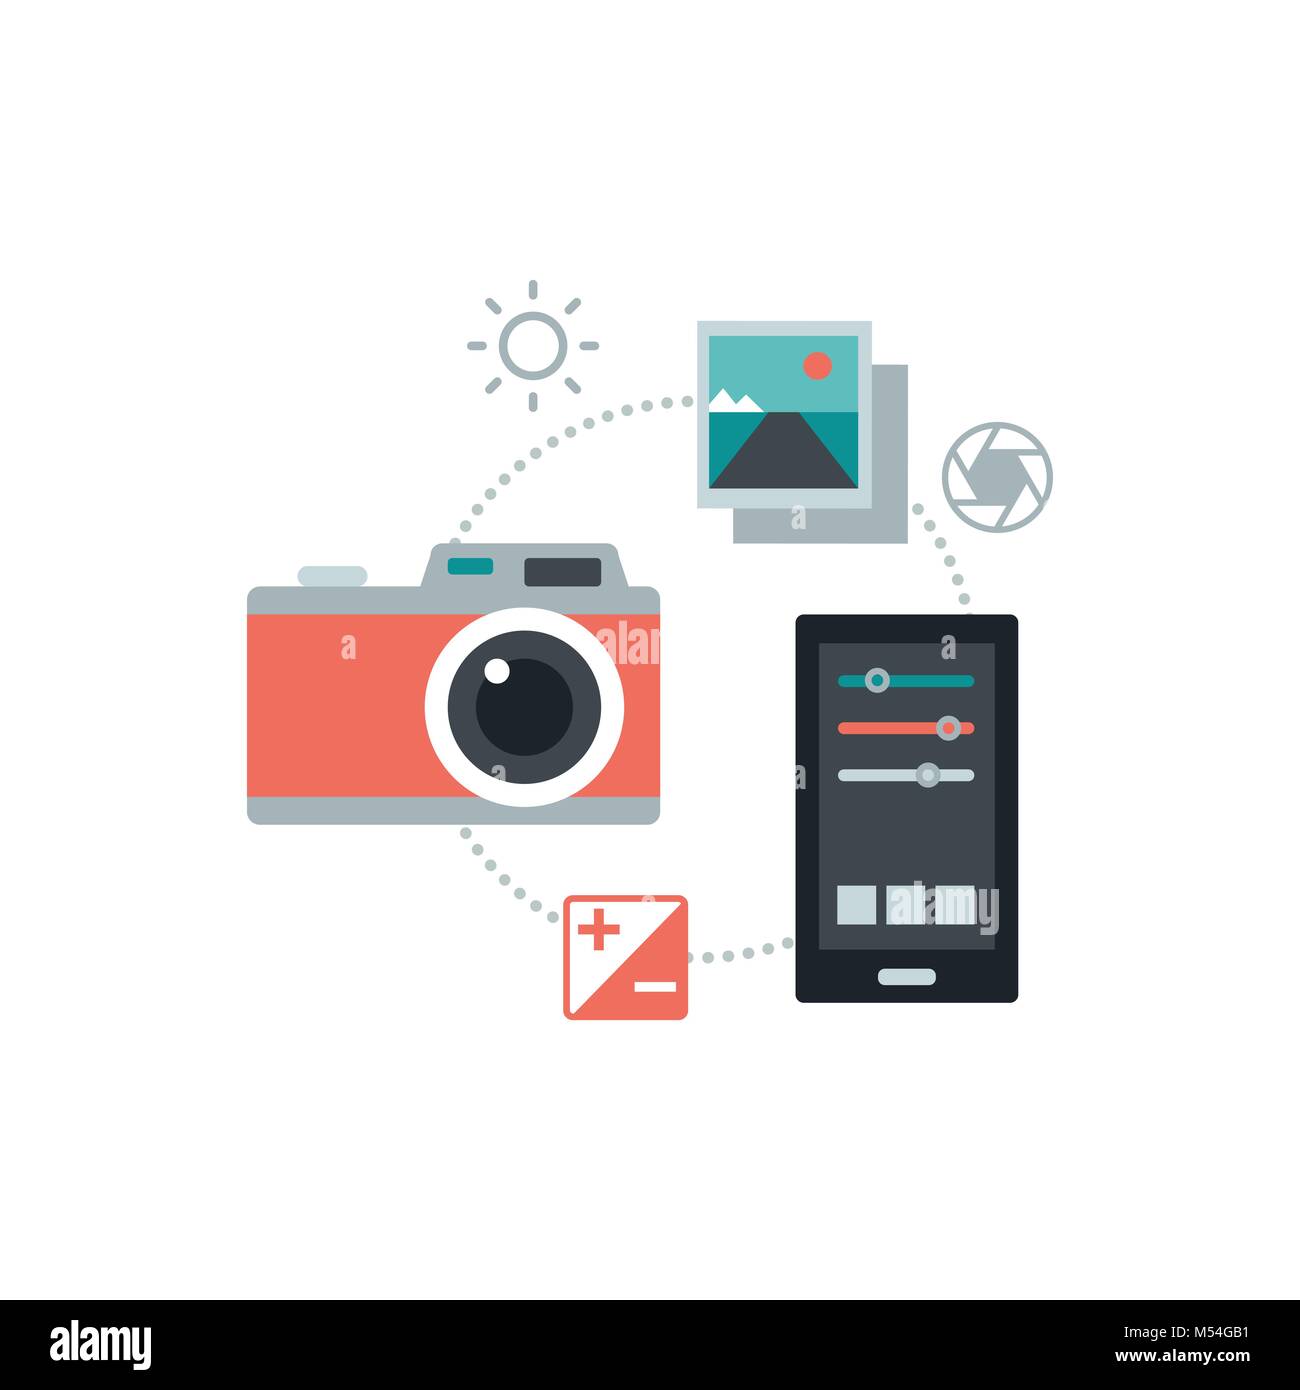 Digital camera and creative photo retouching app on a smartphone Stock Vector